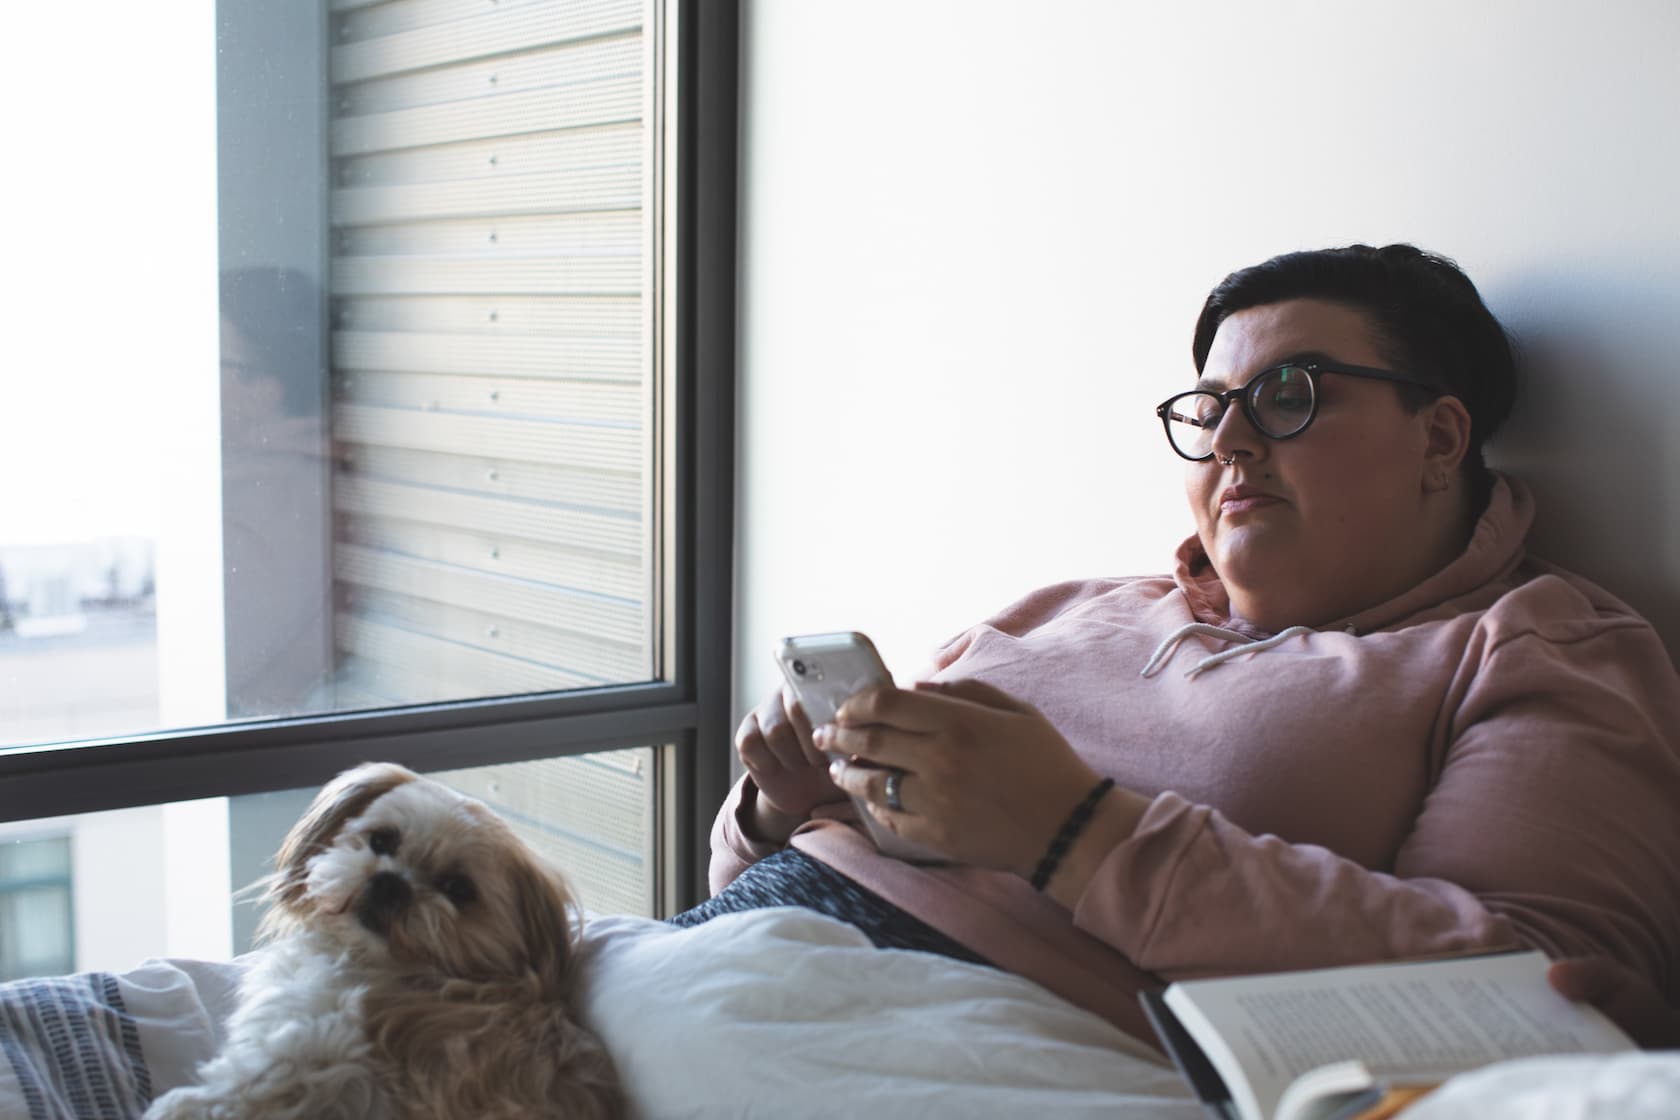 Woman looking at phone on bed with dog